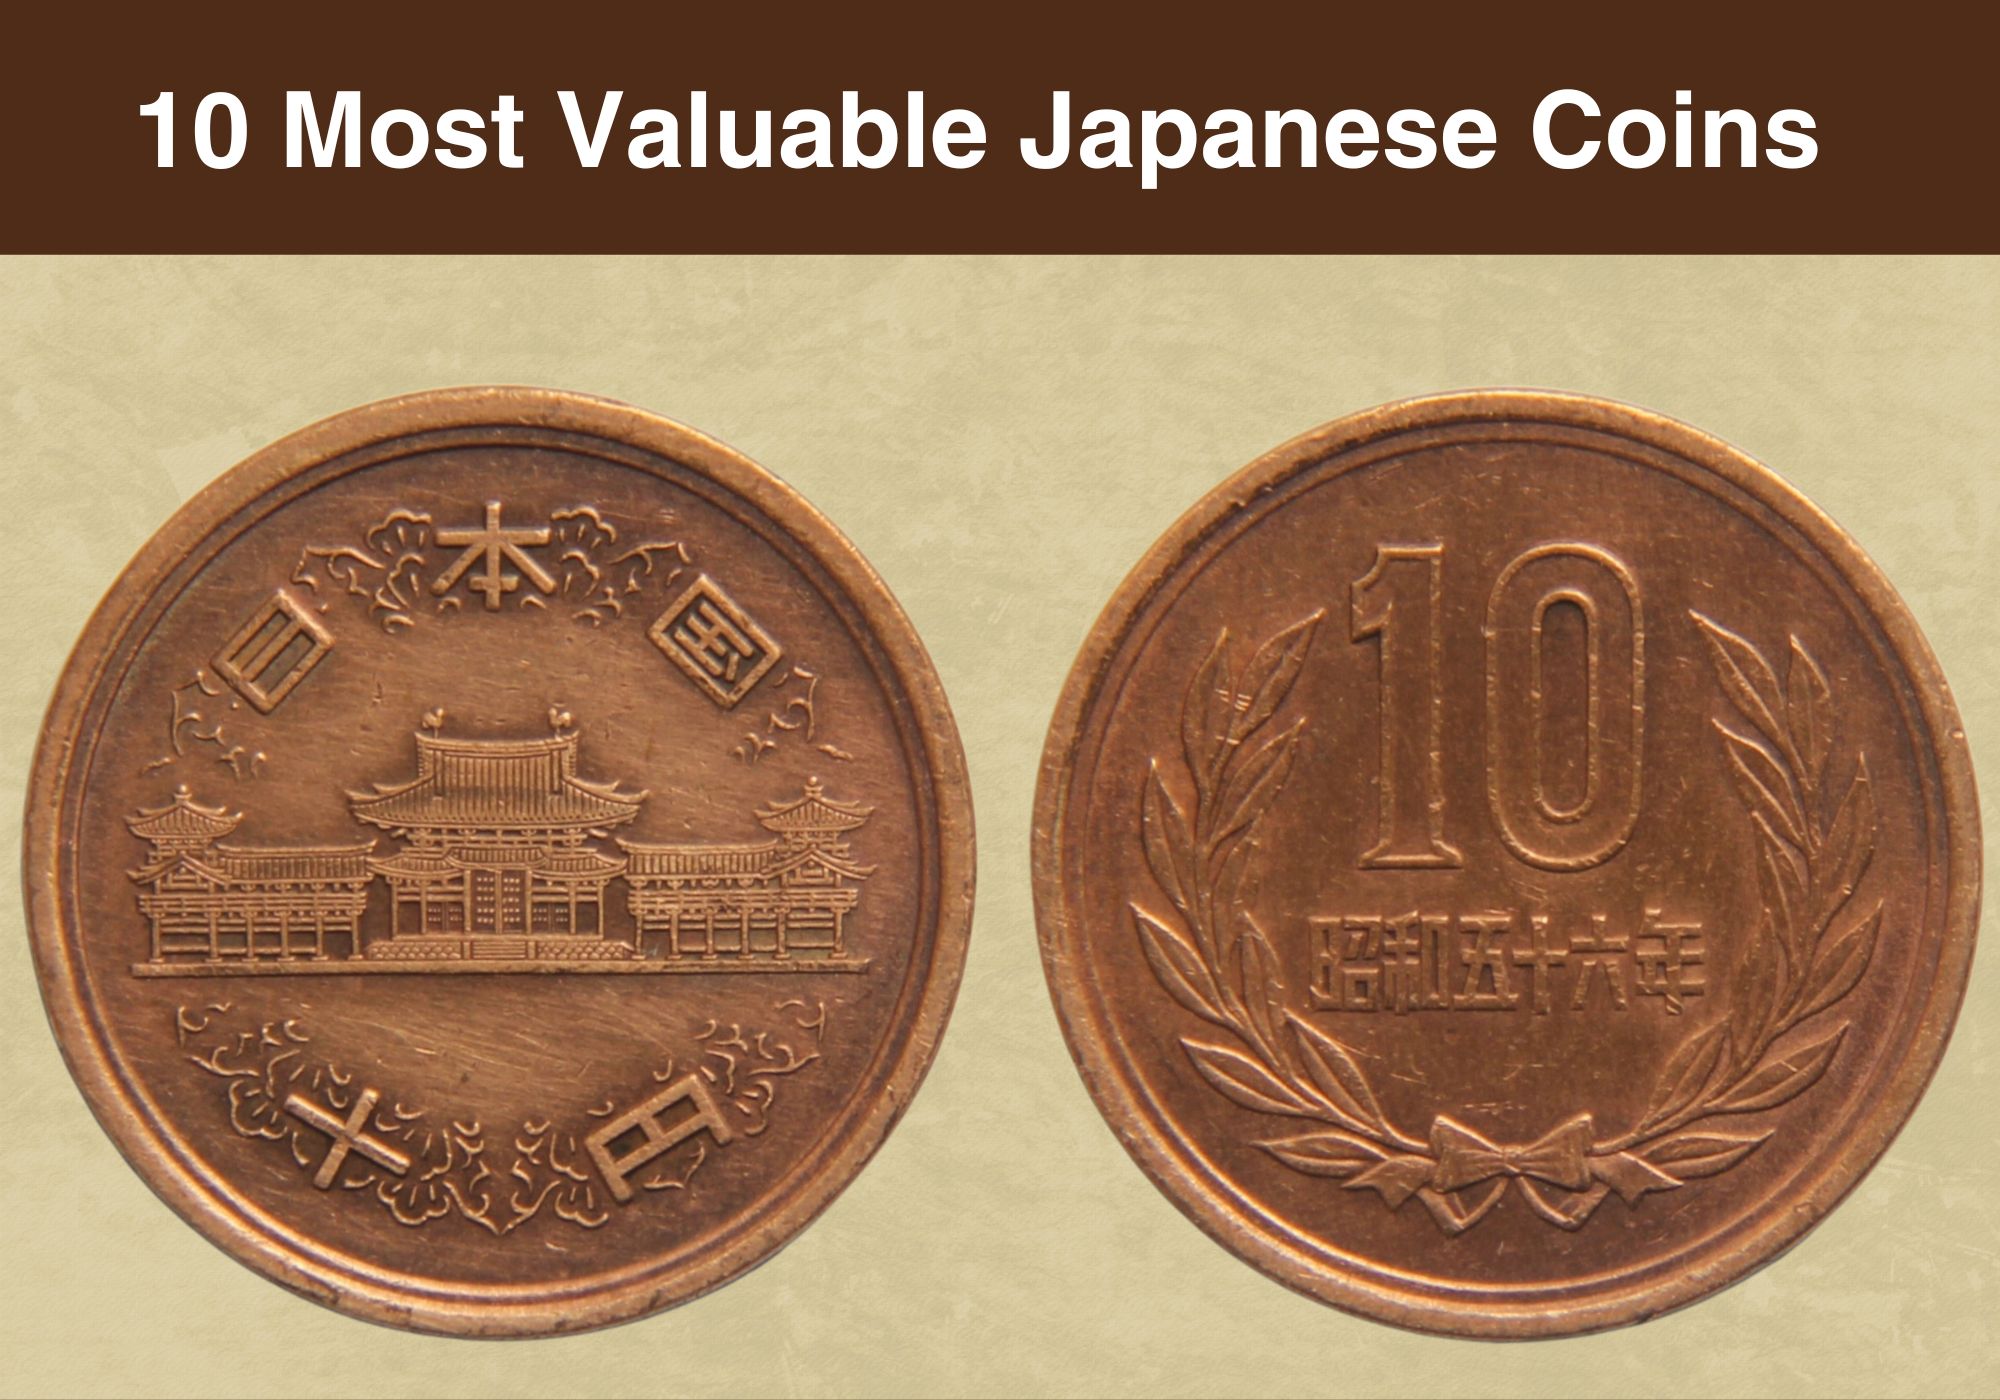 10 Most Valuable Japanese Coins